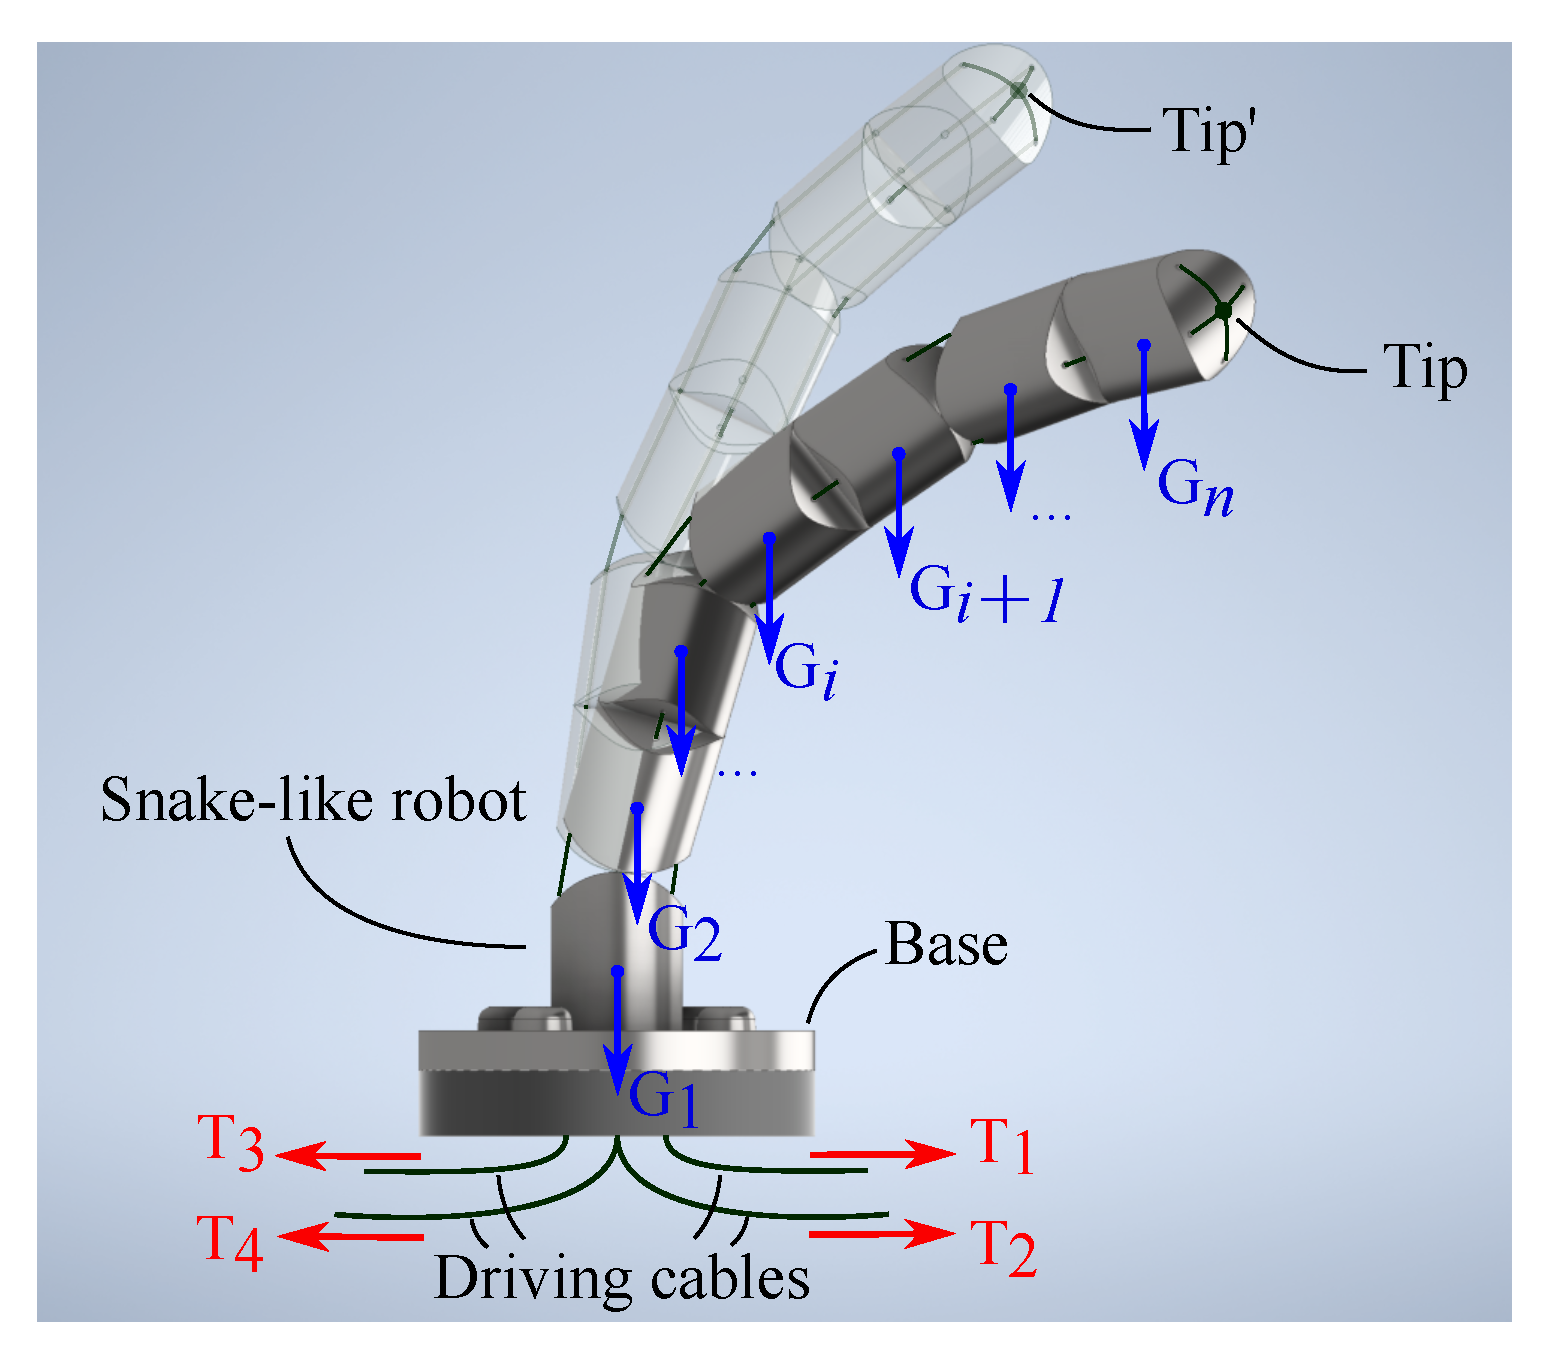 Scientists build robot snake that could help in disaster response, Robots